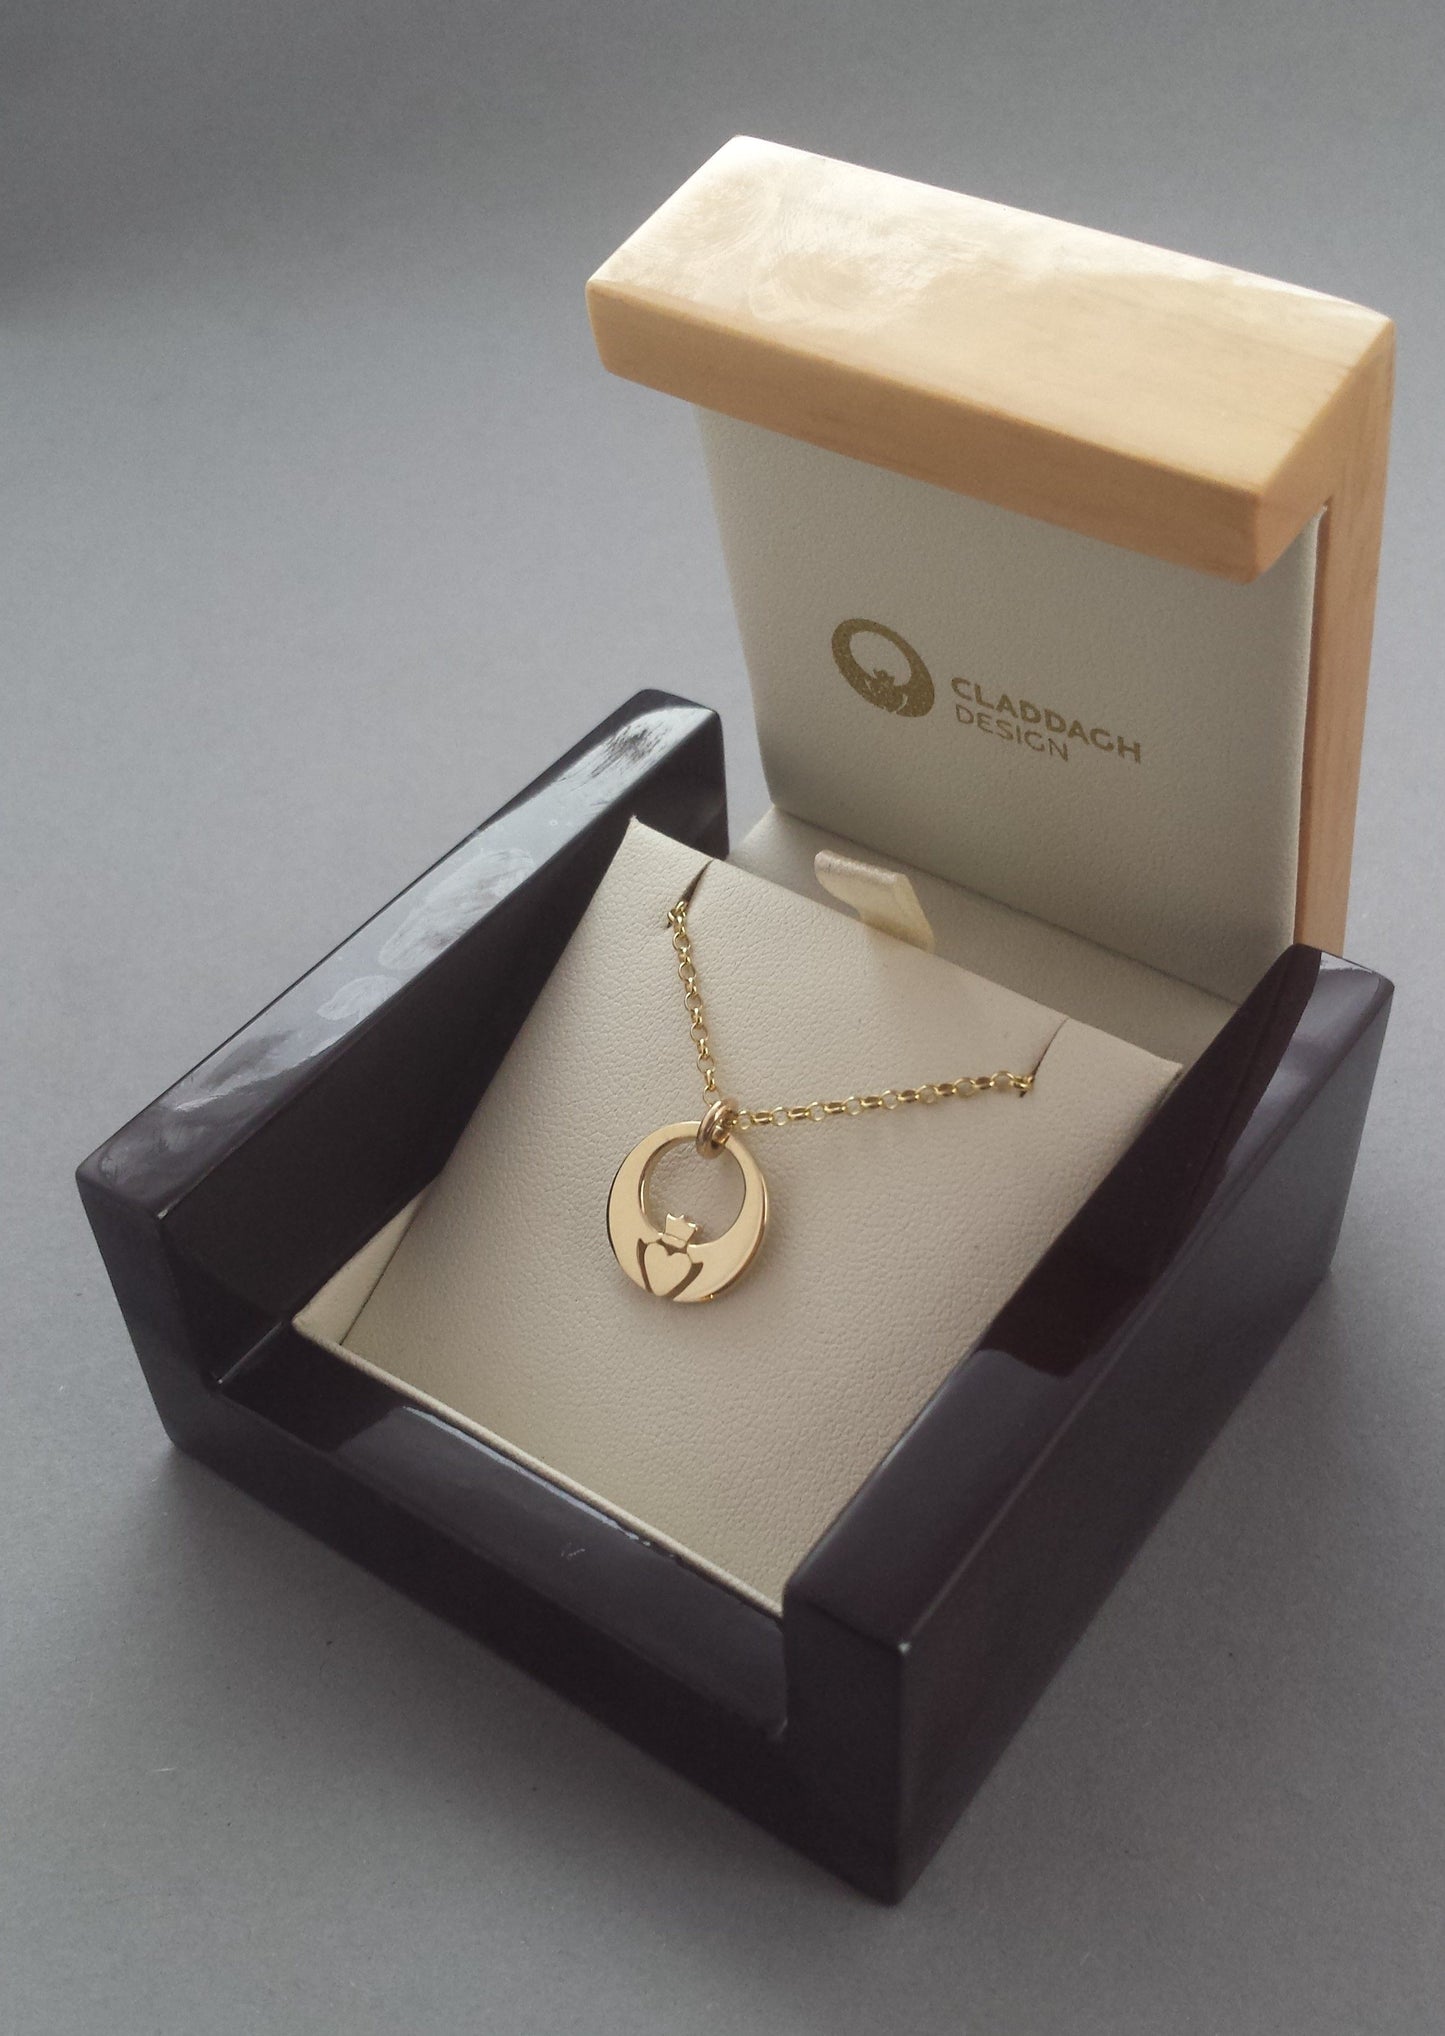 Gold Claddagh pendant in box